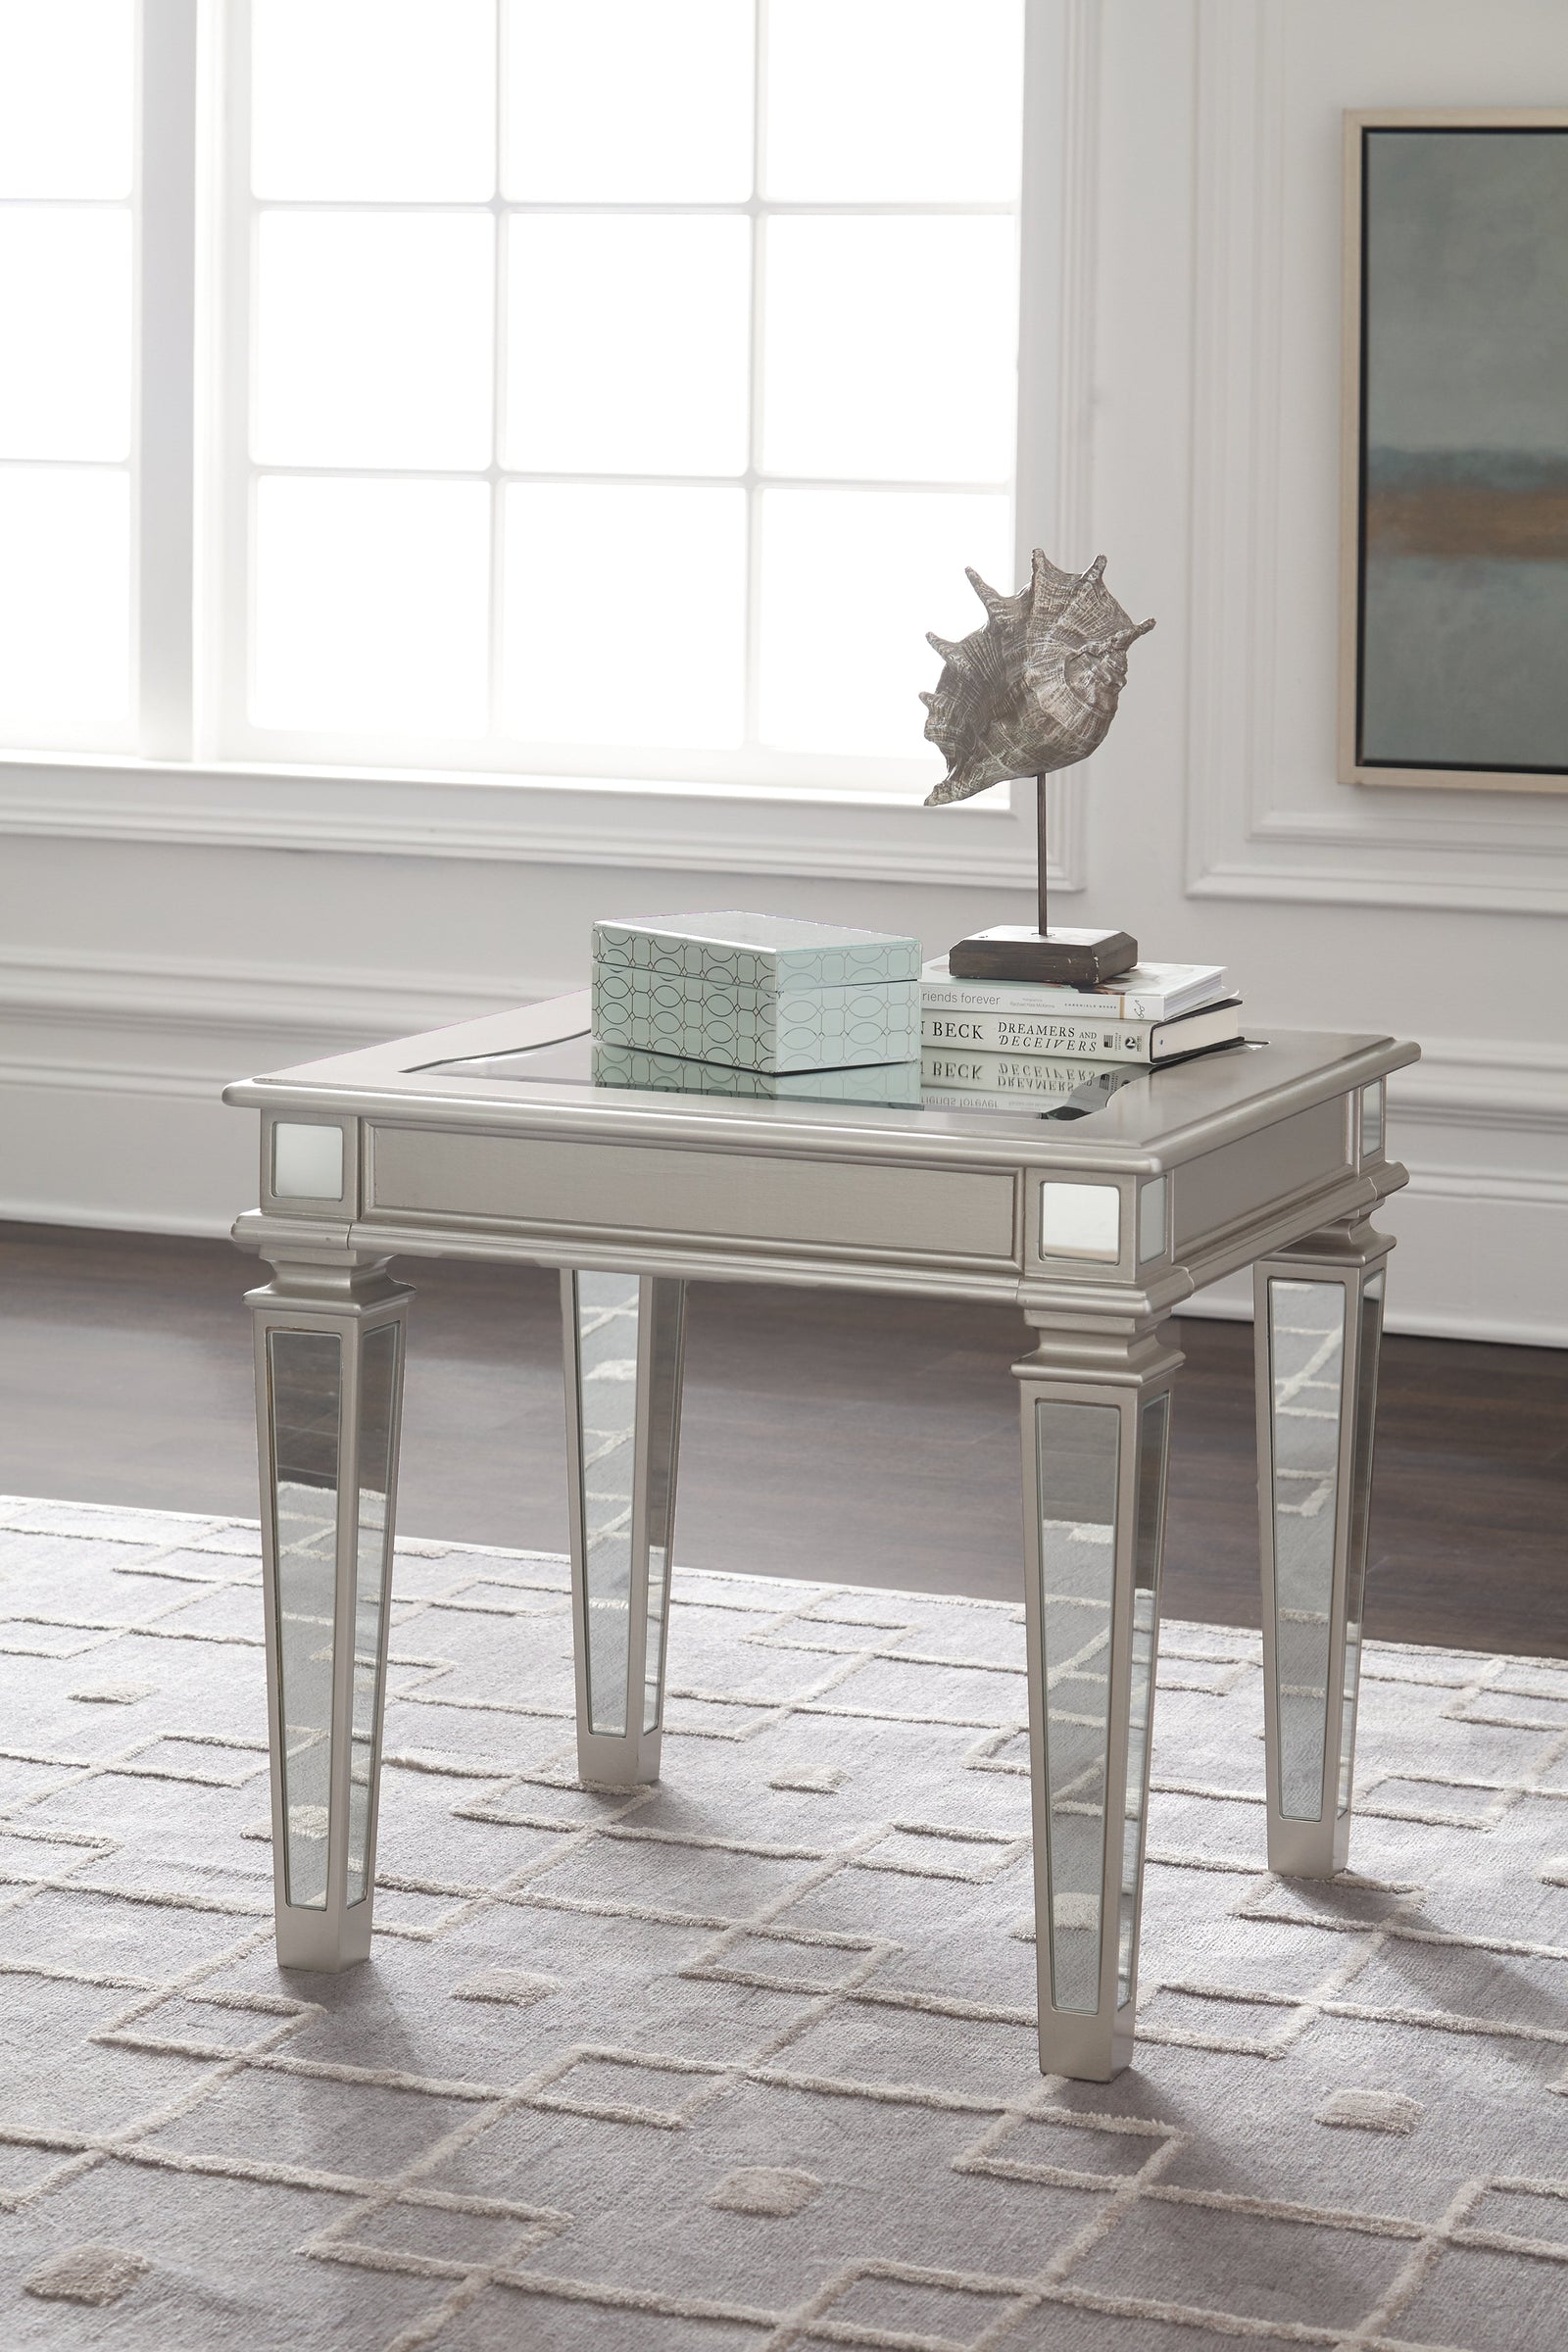 Tessani Silver 2 End Tables